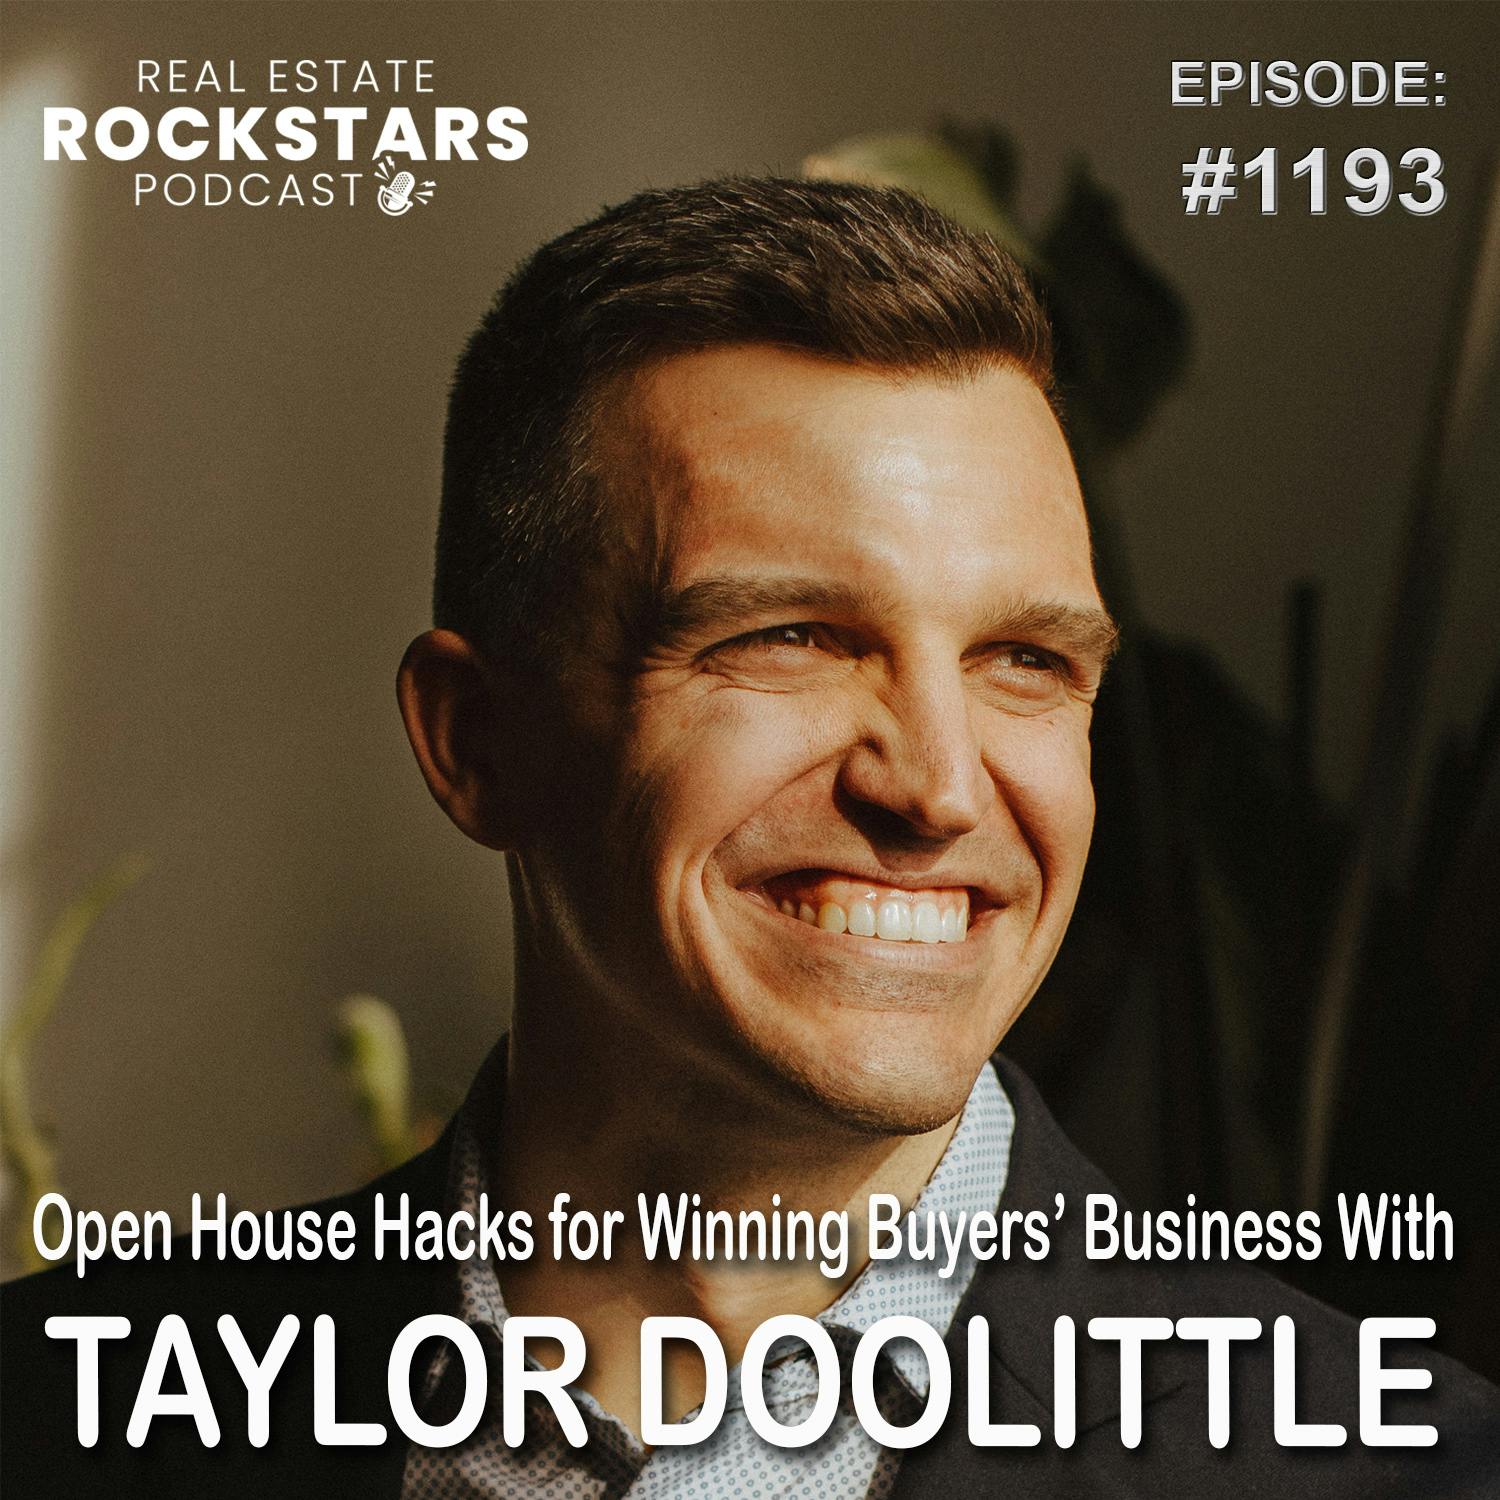 1193: Open House Hacks for Winning Buyers’ Business With Taylor Doolittle